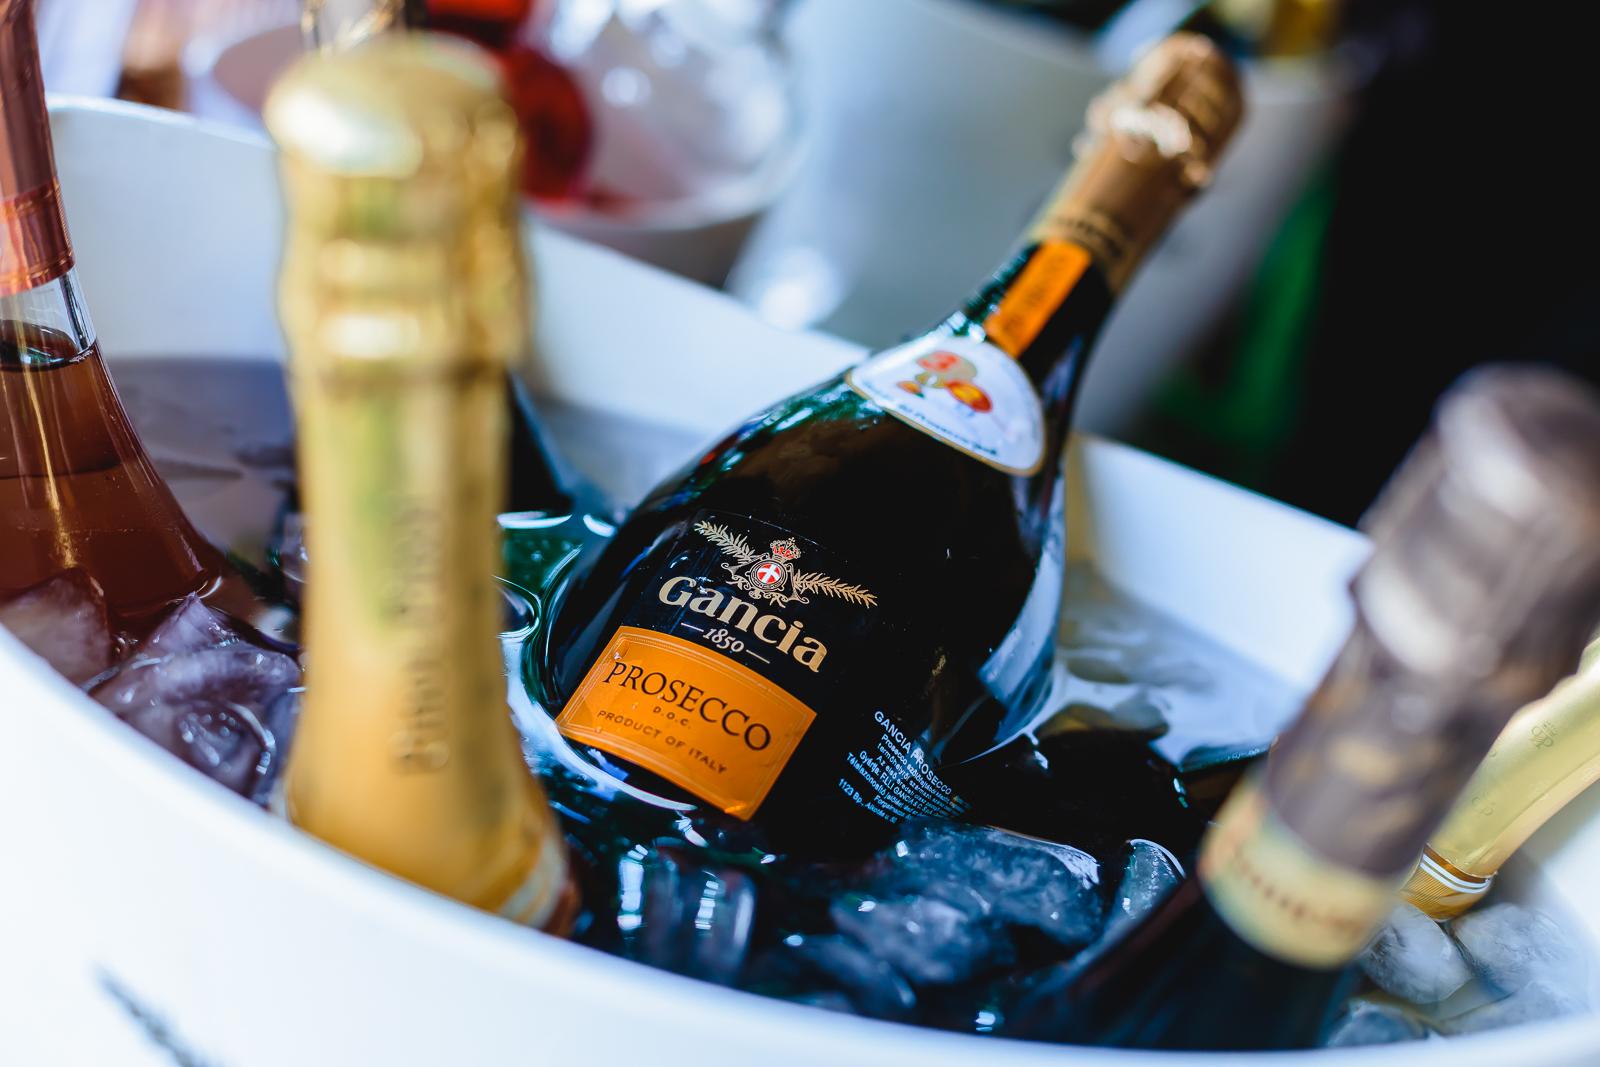 Introducing Gancia  - The First Italian Sparkling Wine